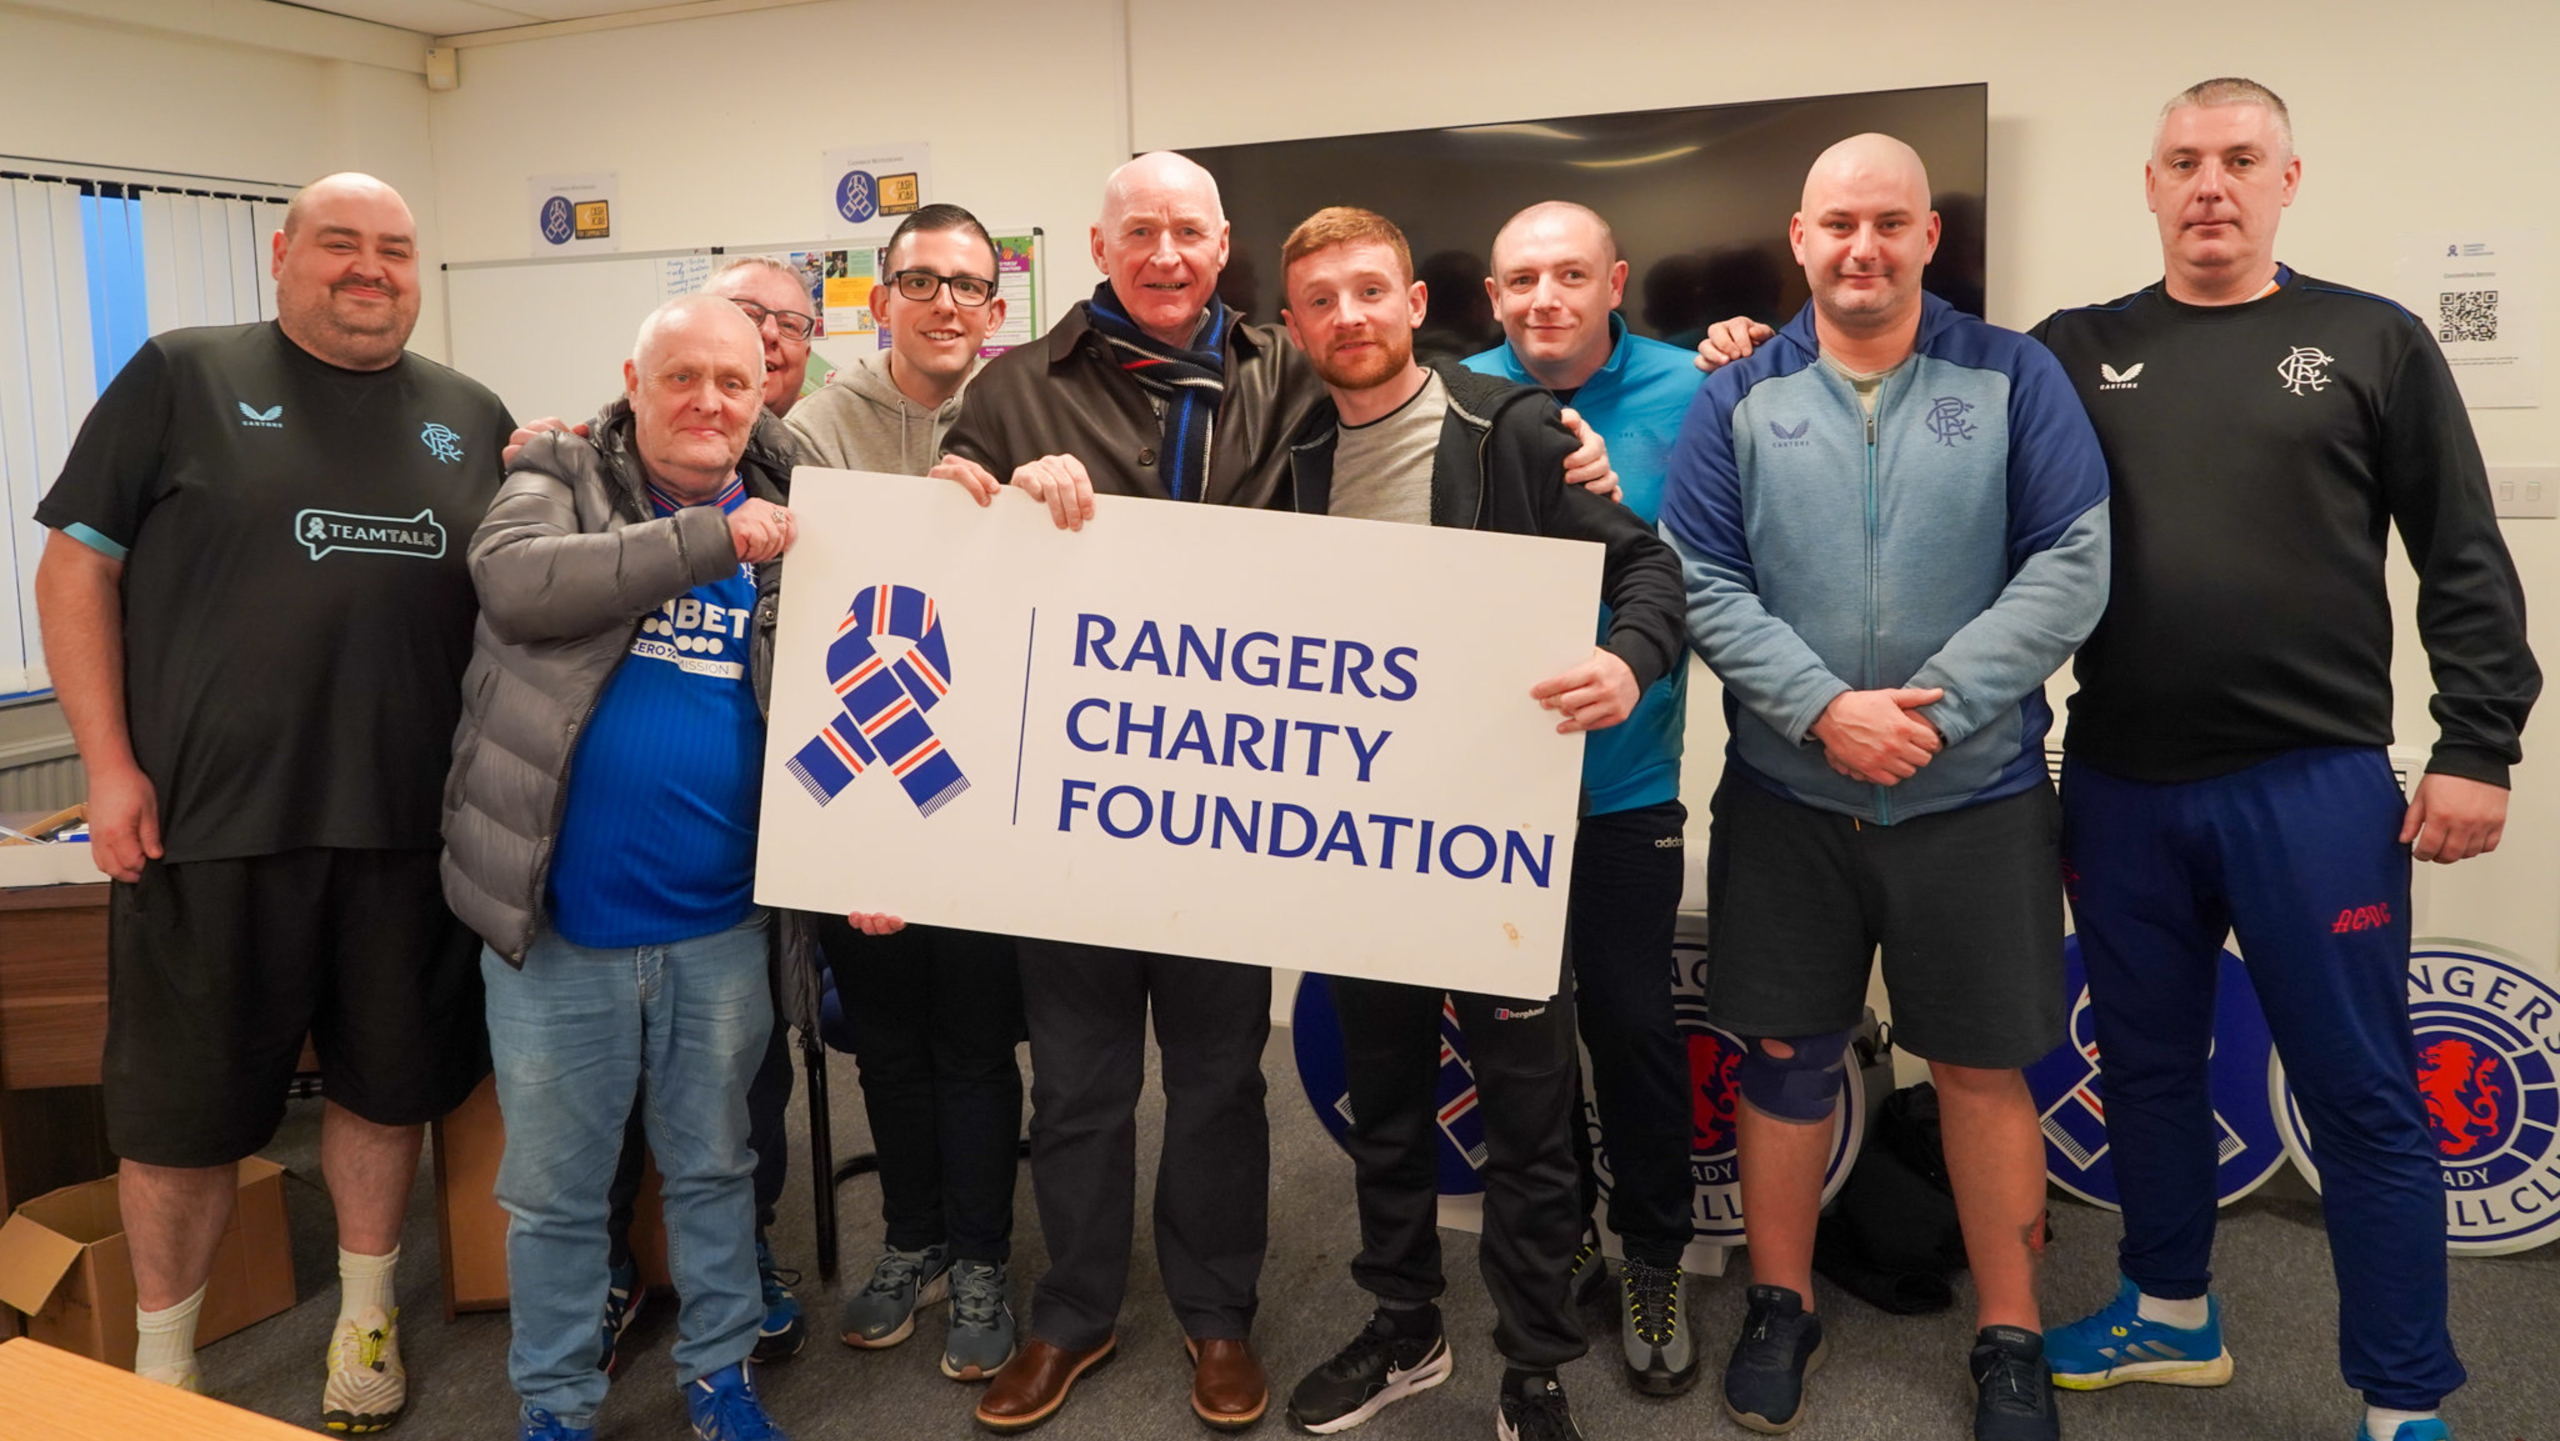 A group of men standing next to former Rangers player John Brown